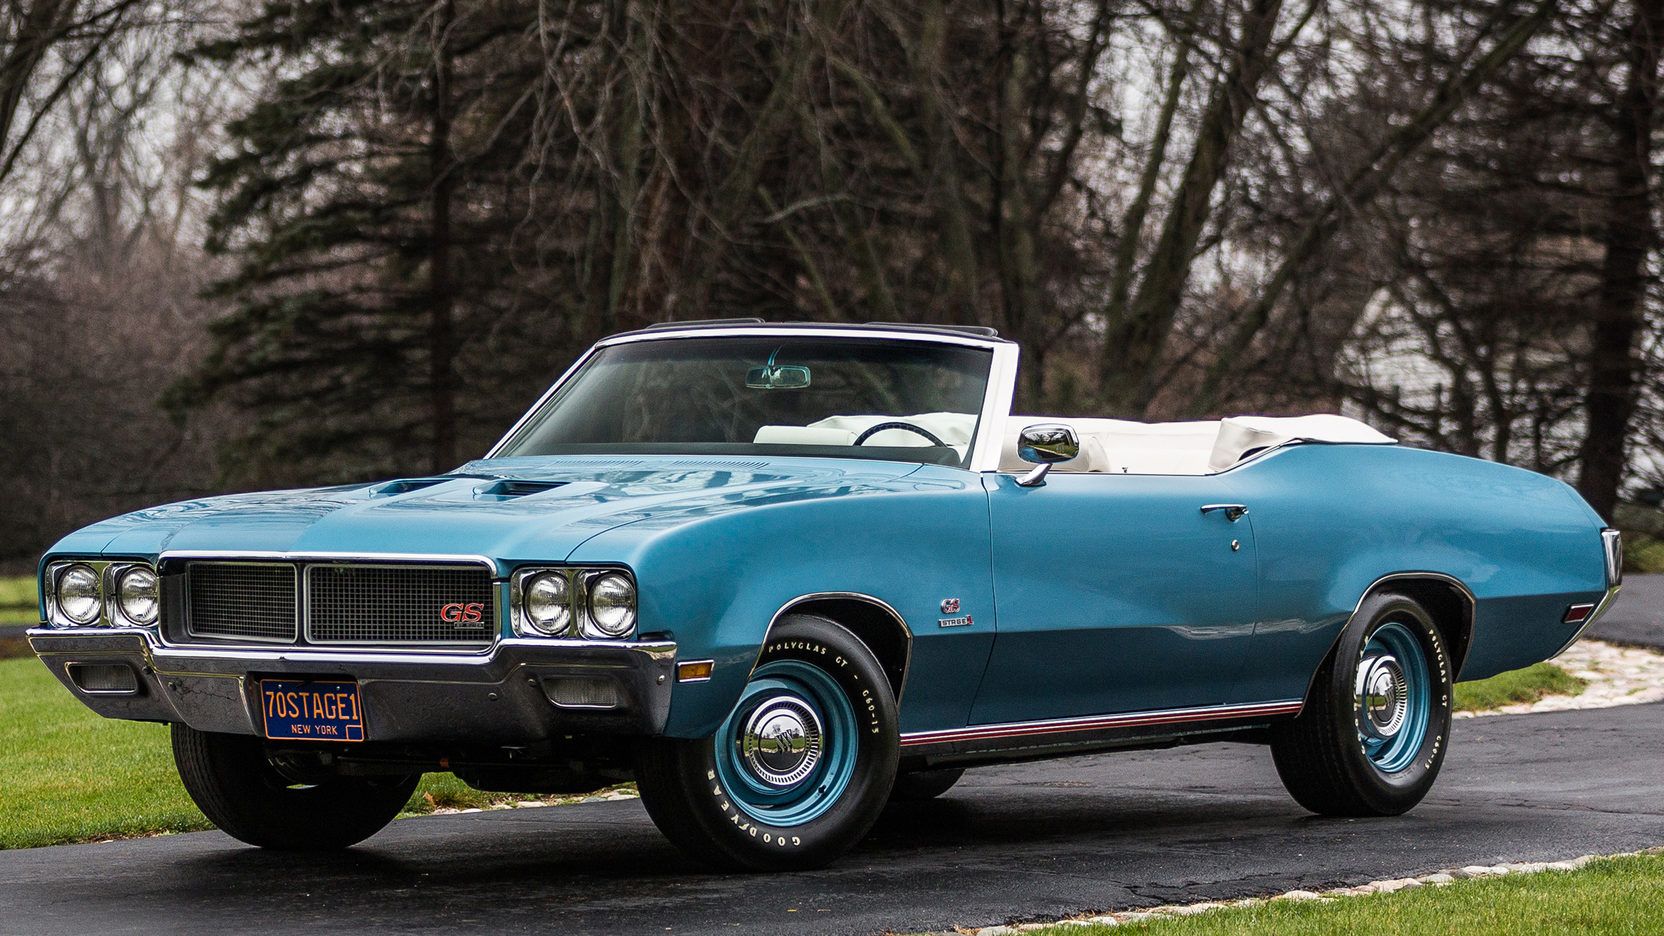 1970 Buick GSX Stage 1 on the road